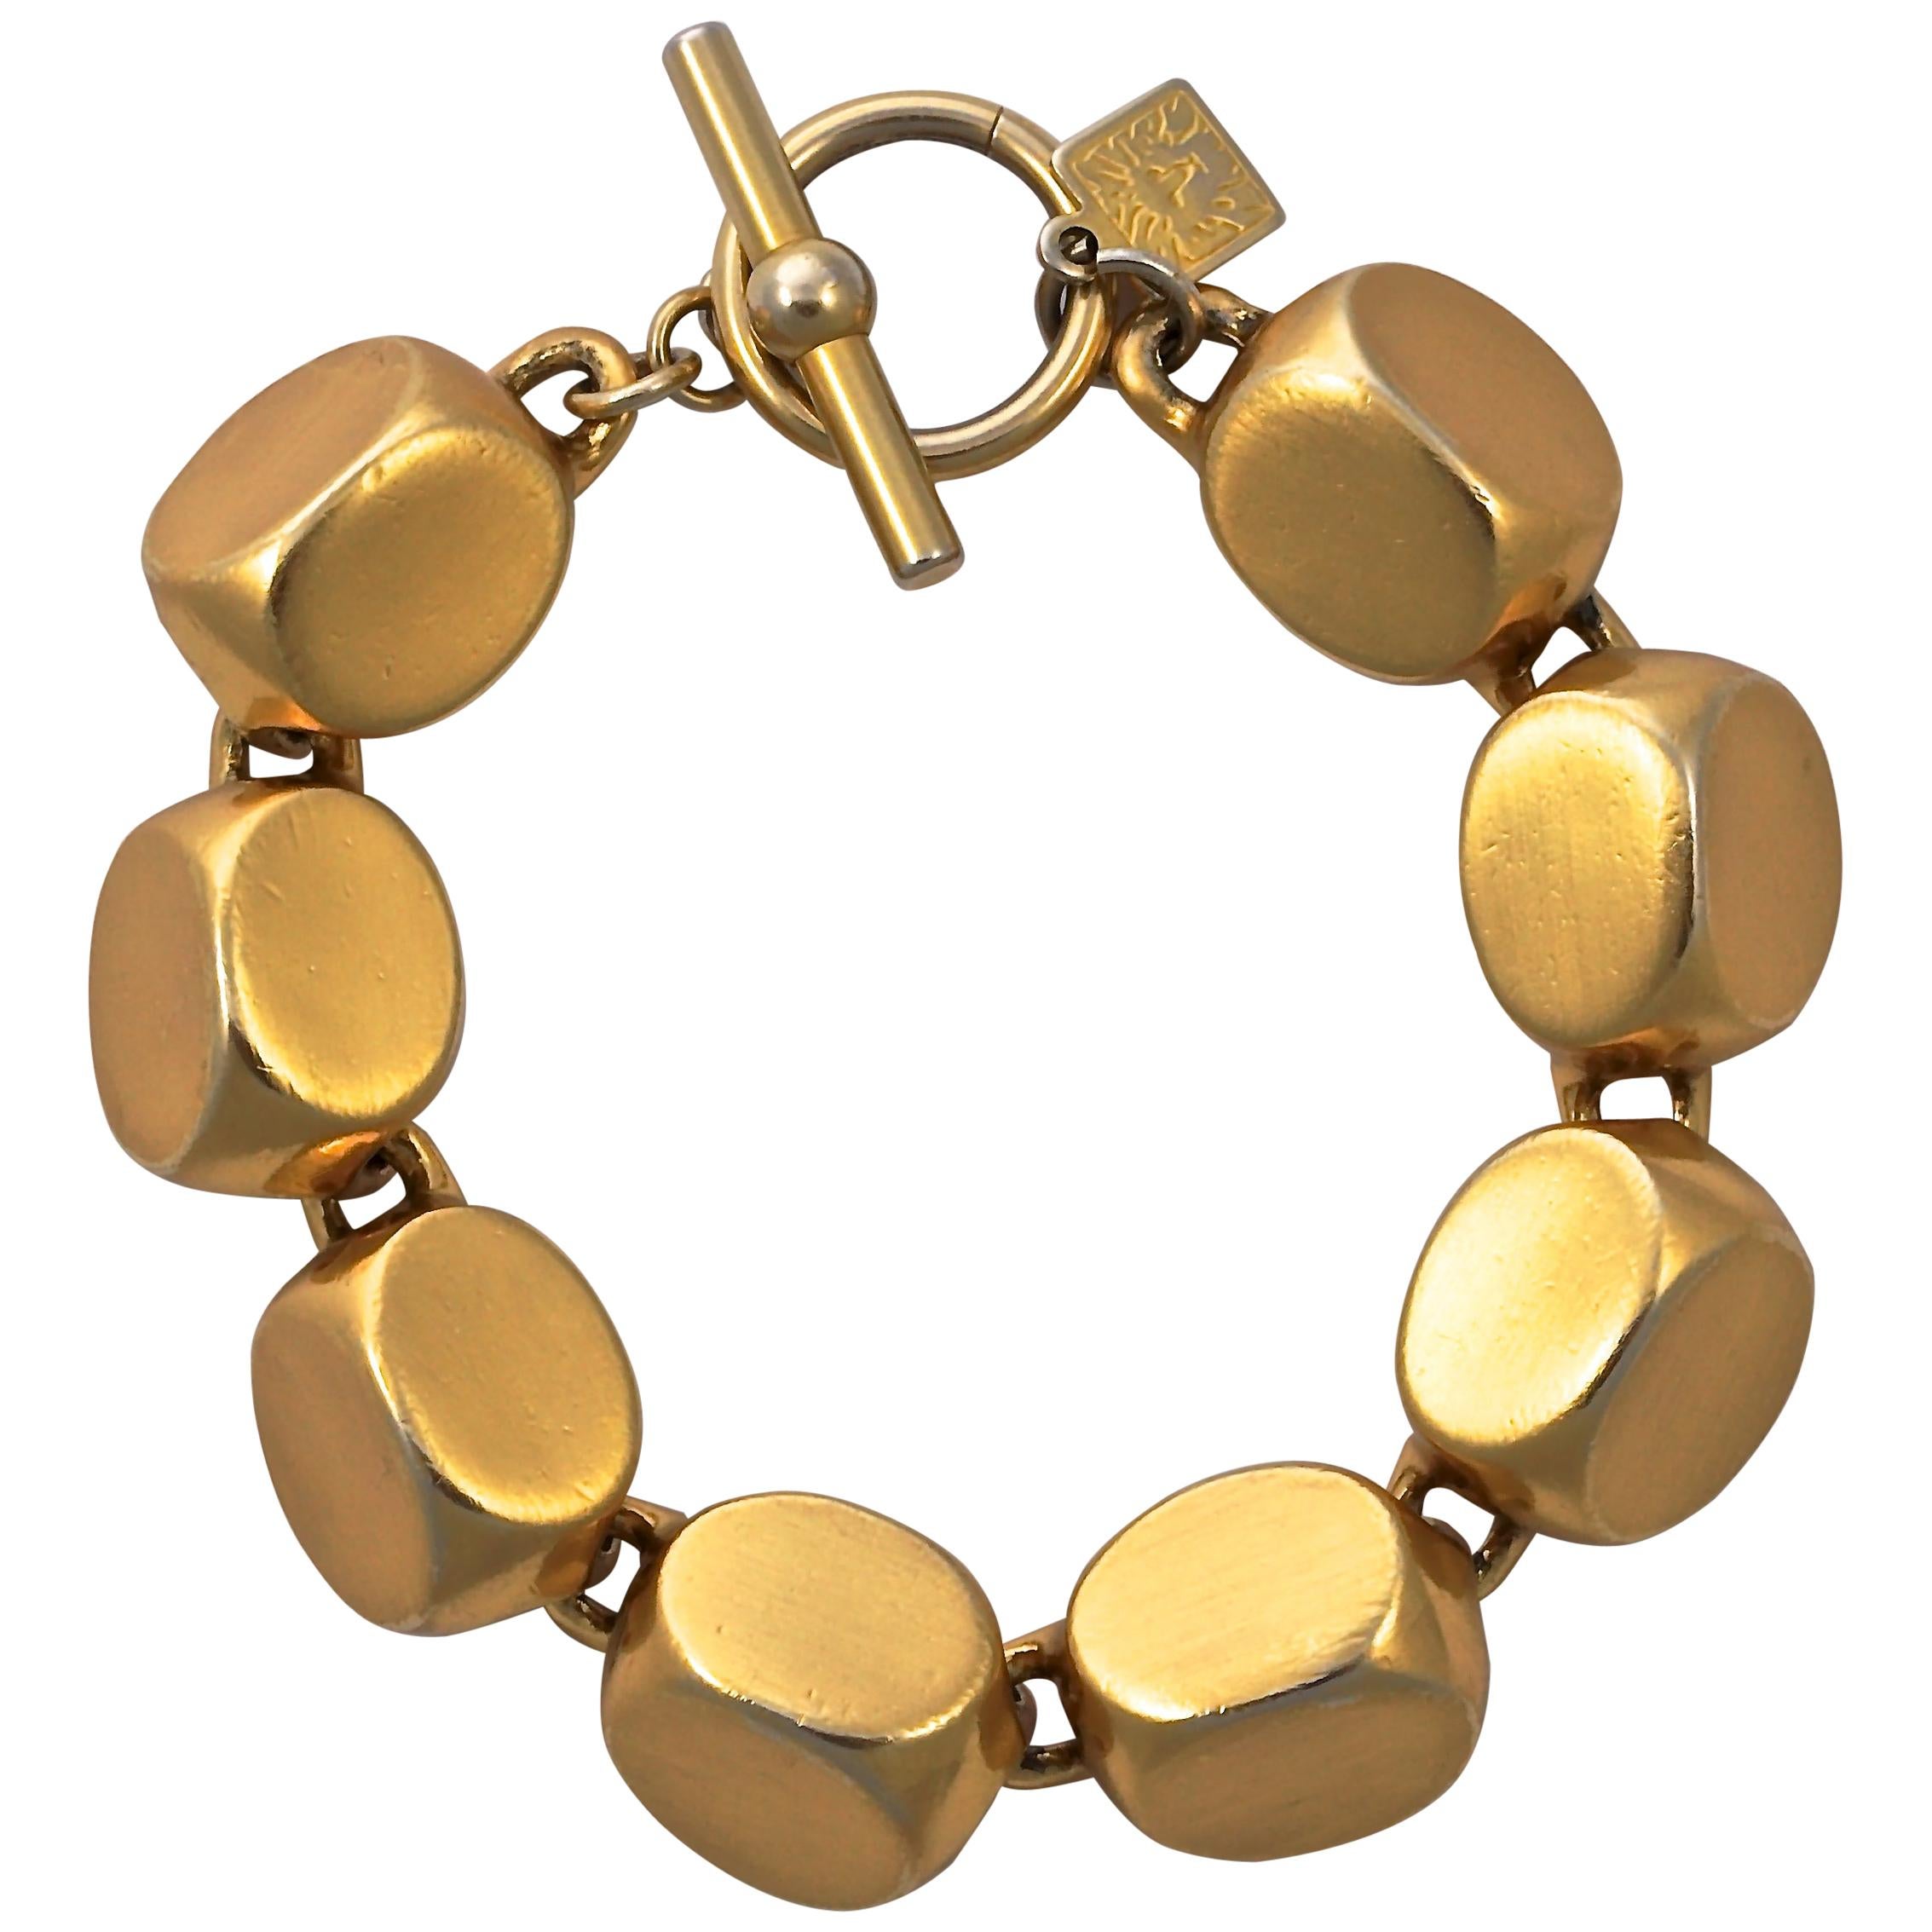 Anne Klein Gold Plated Satin Brushed Link Bracelet with Toggle Clasp circa 1980s